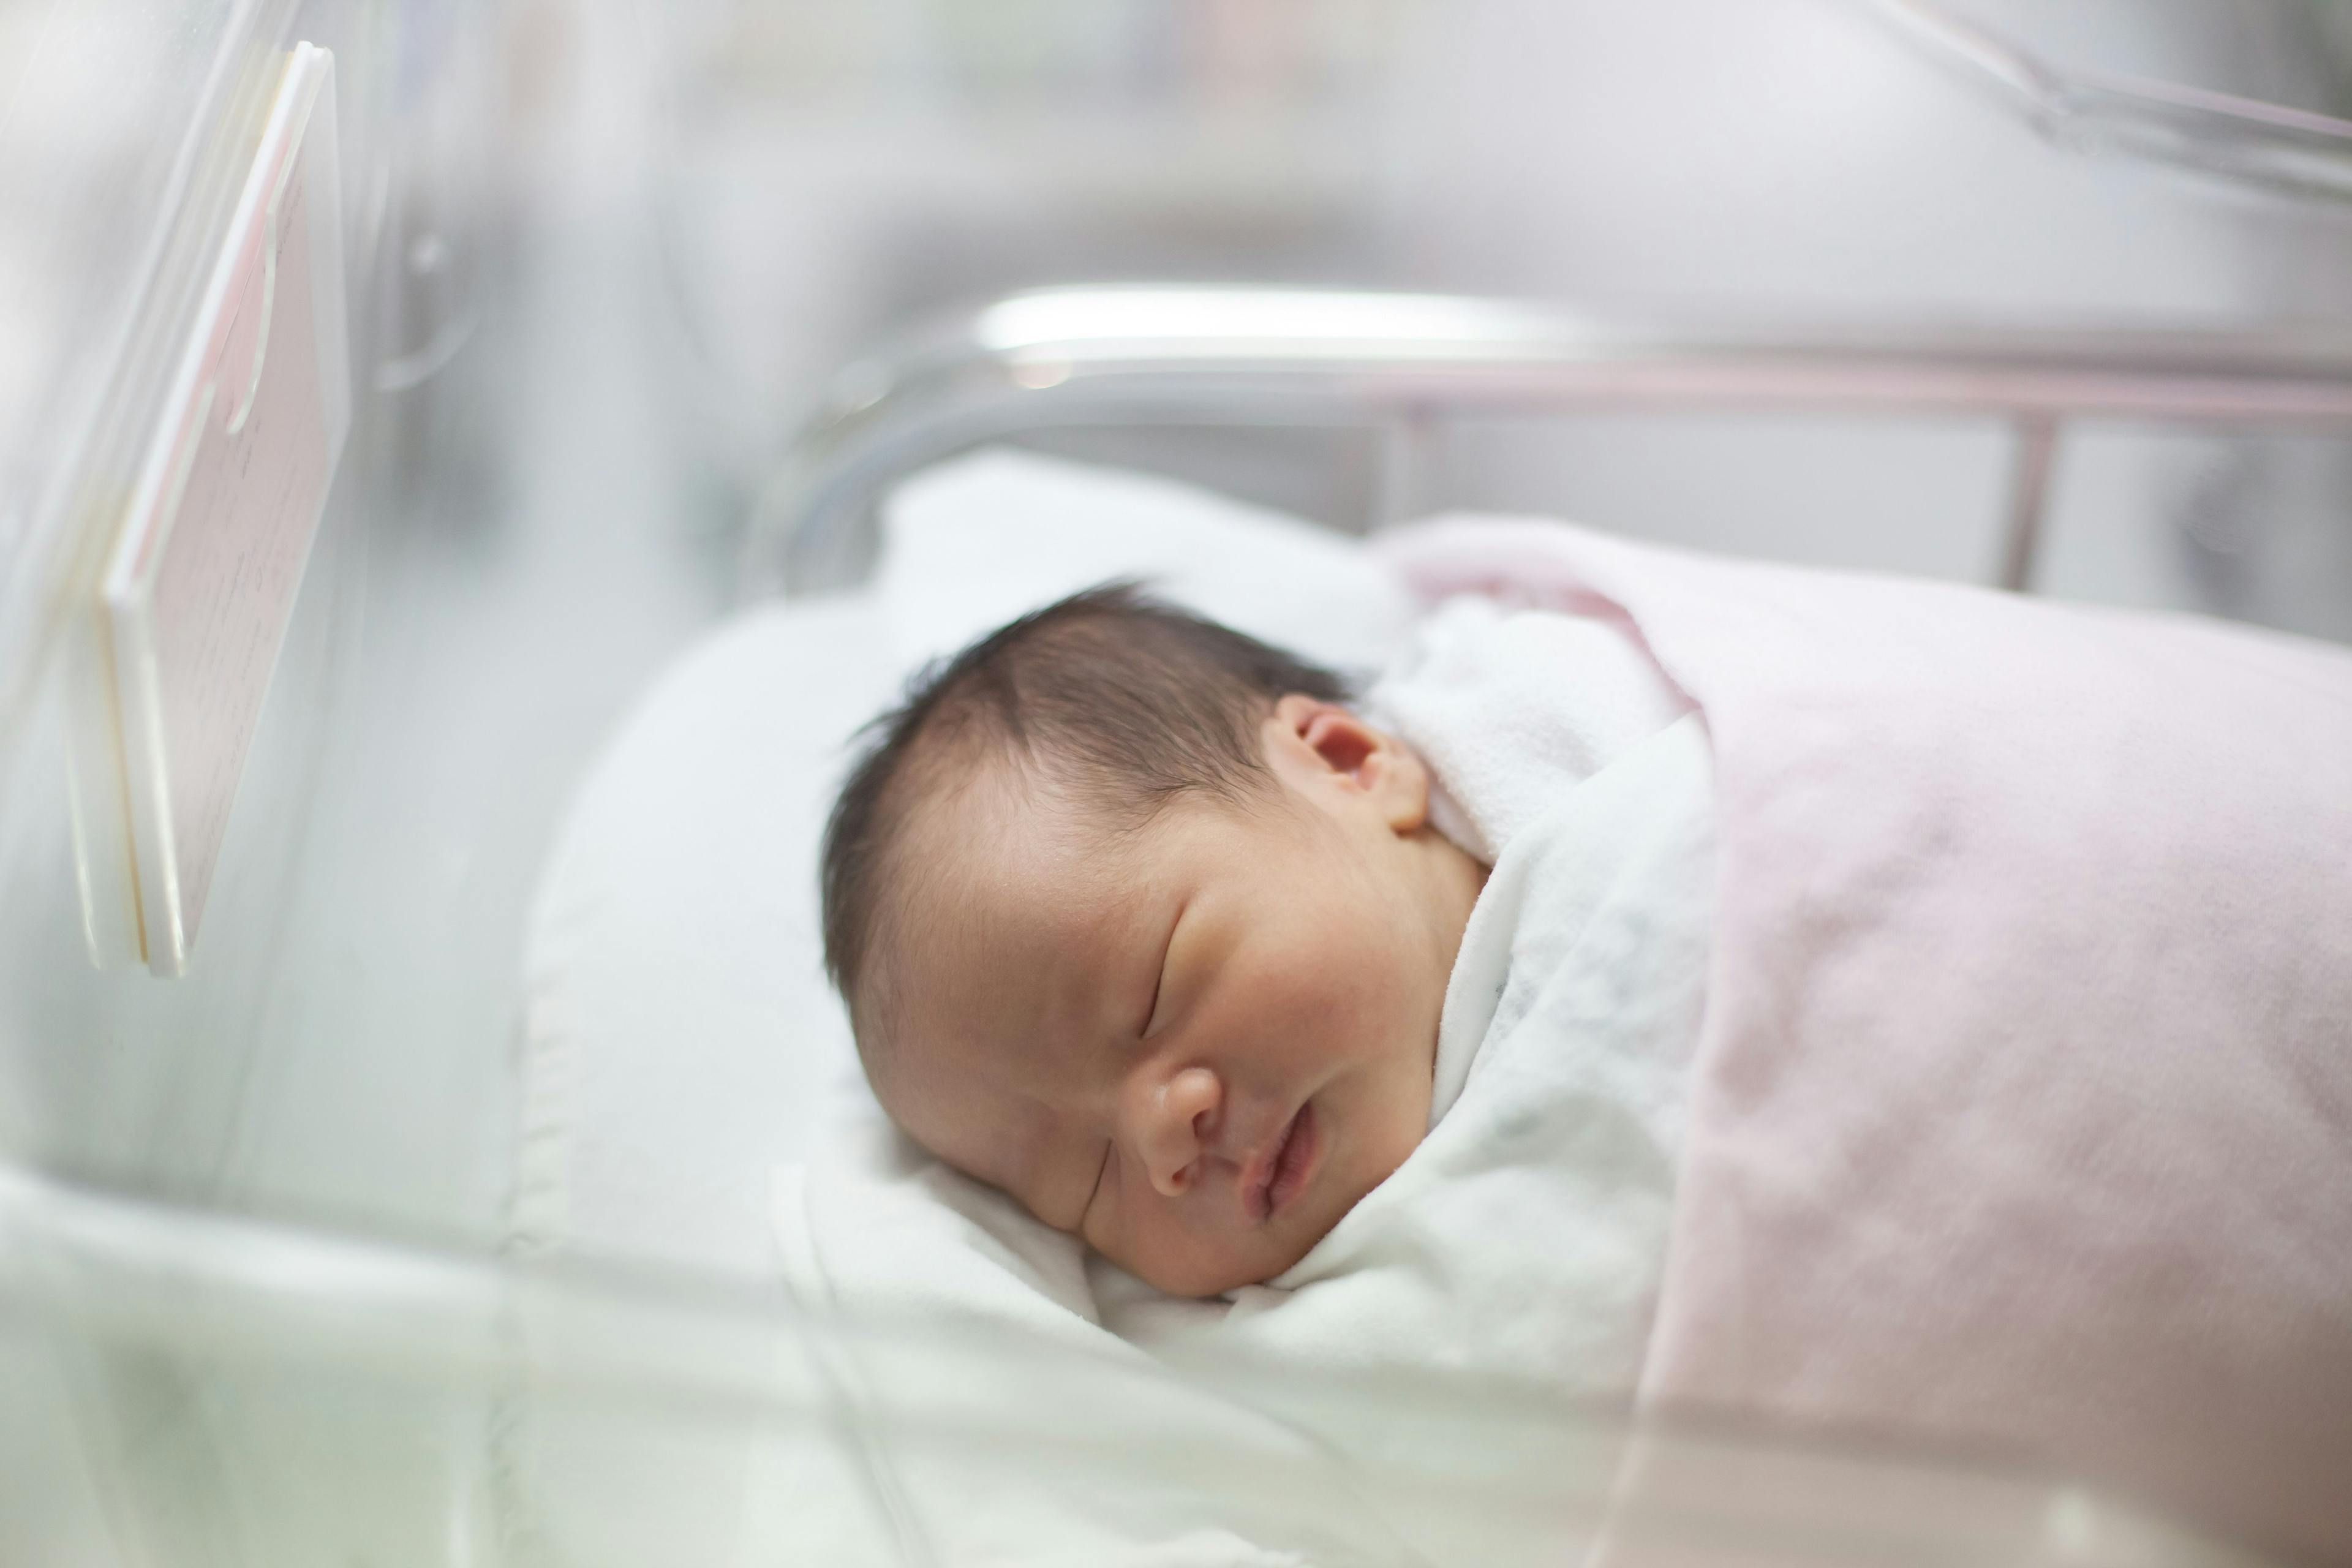 Stress Ulcer Prophylaxis May Not Prevent Gastrointestinal Bleeding in Neonates